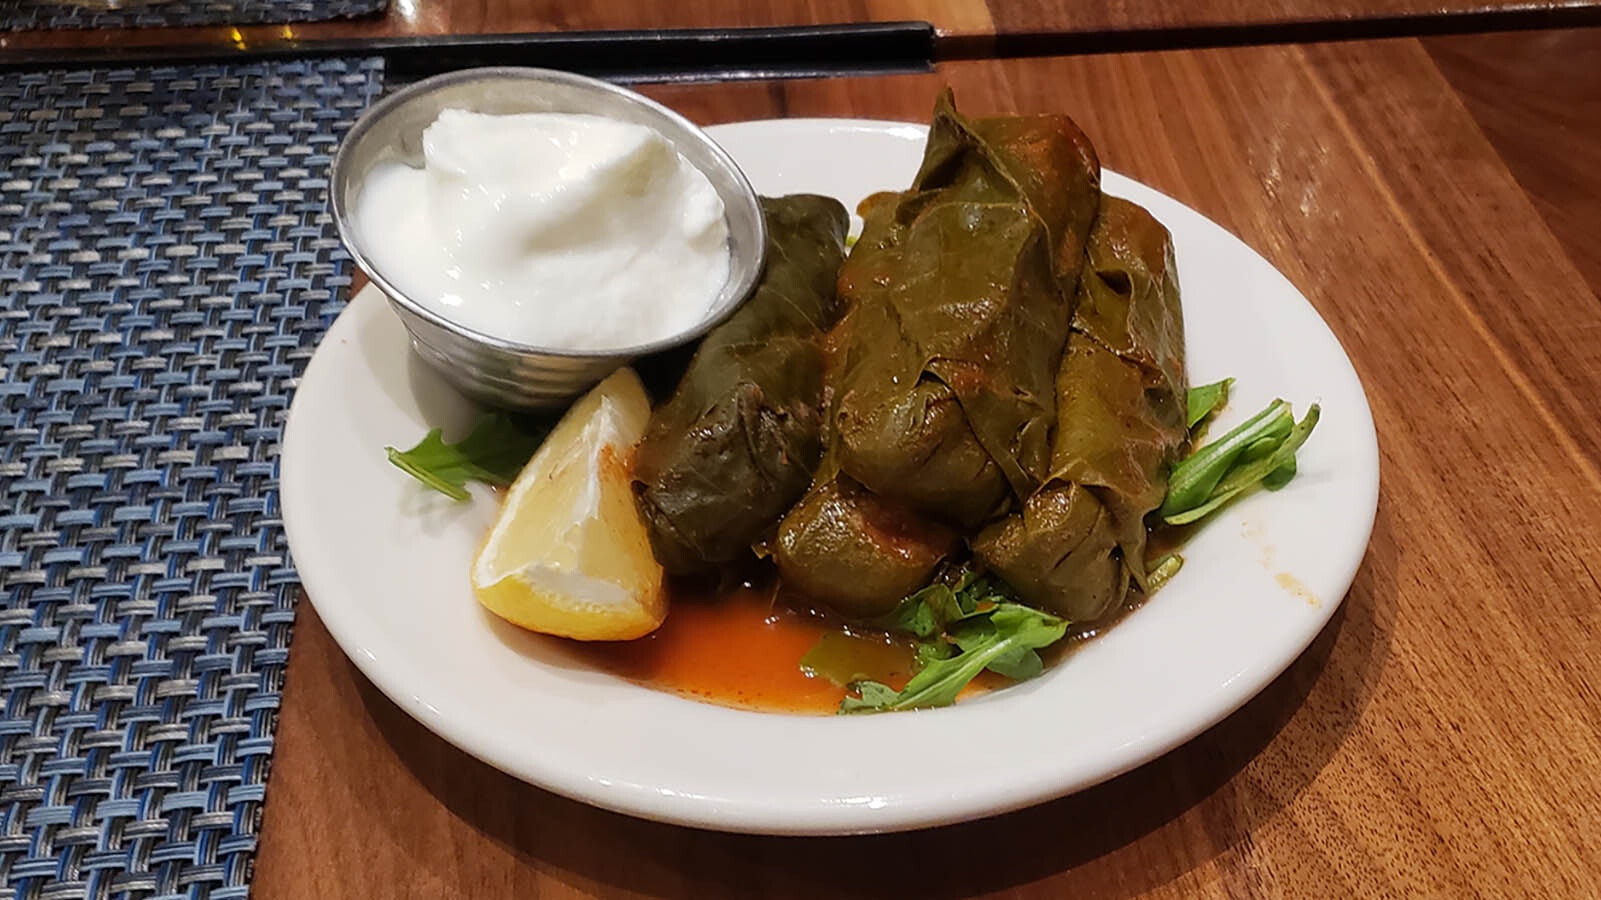 That might look like sour cream on the side, but looks are deceiving. That is actually toum, a Lebanese garlic sauce thats made with simple ingredients of fresh olive oil and lemon juice seasoned with just a pinch of salt. It is divine.